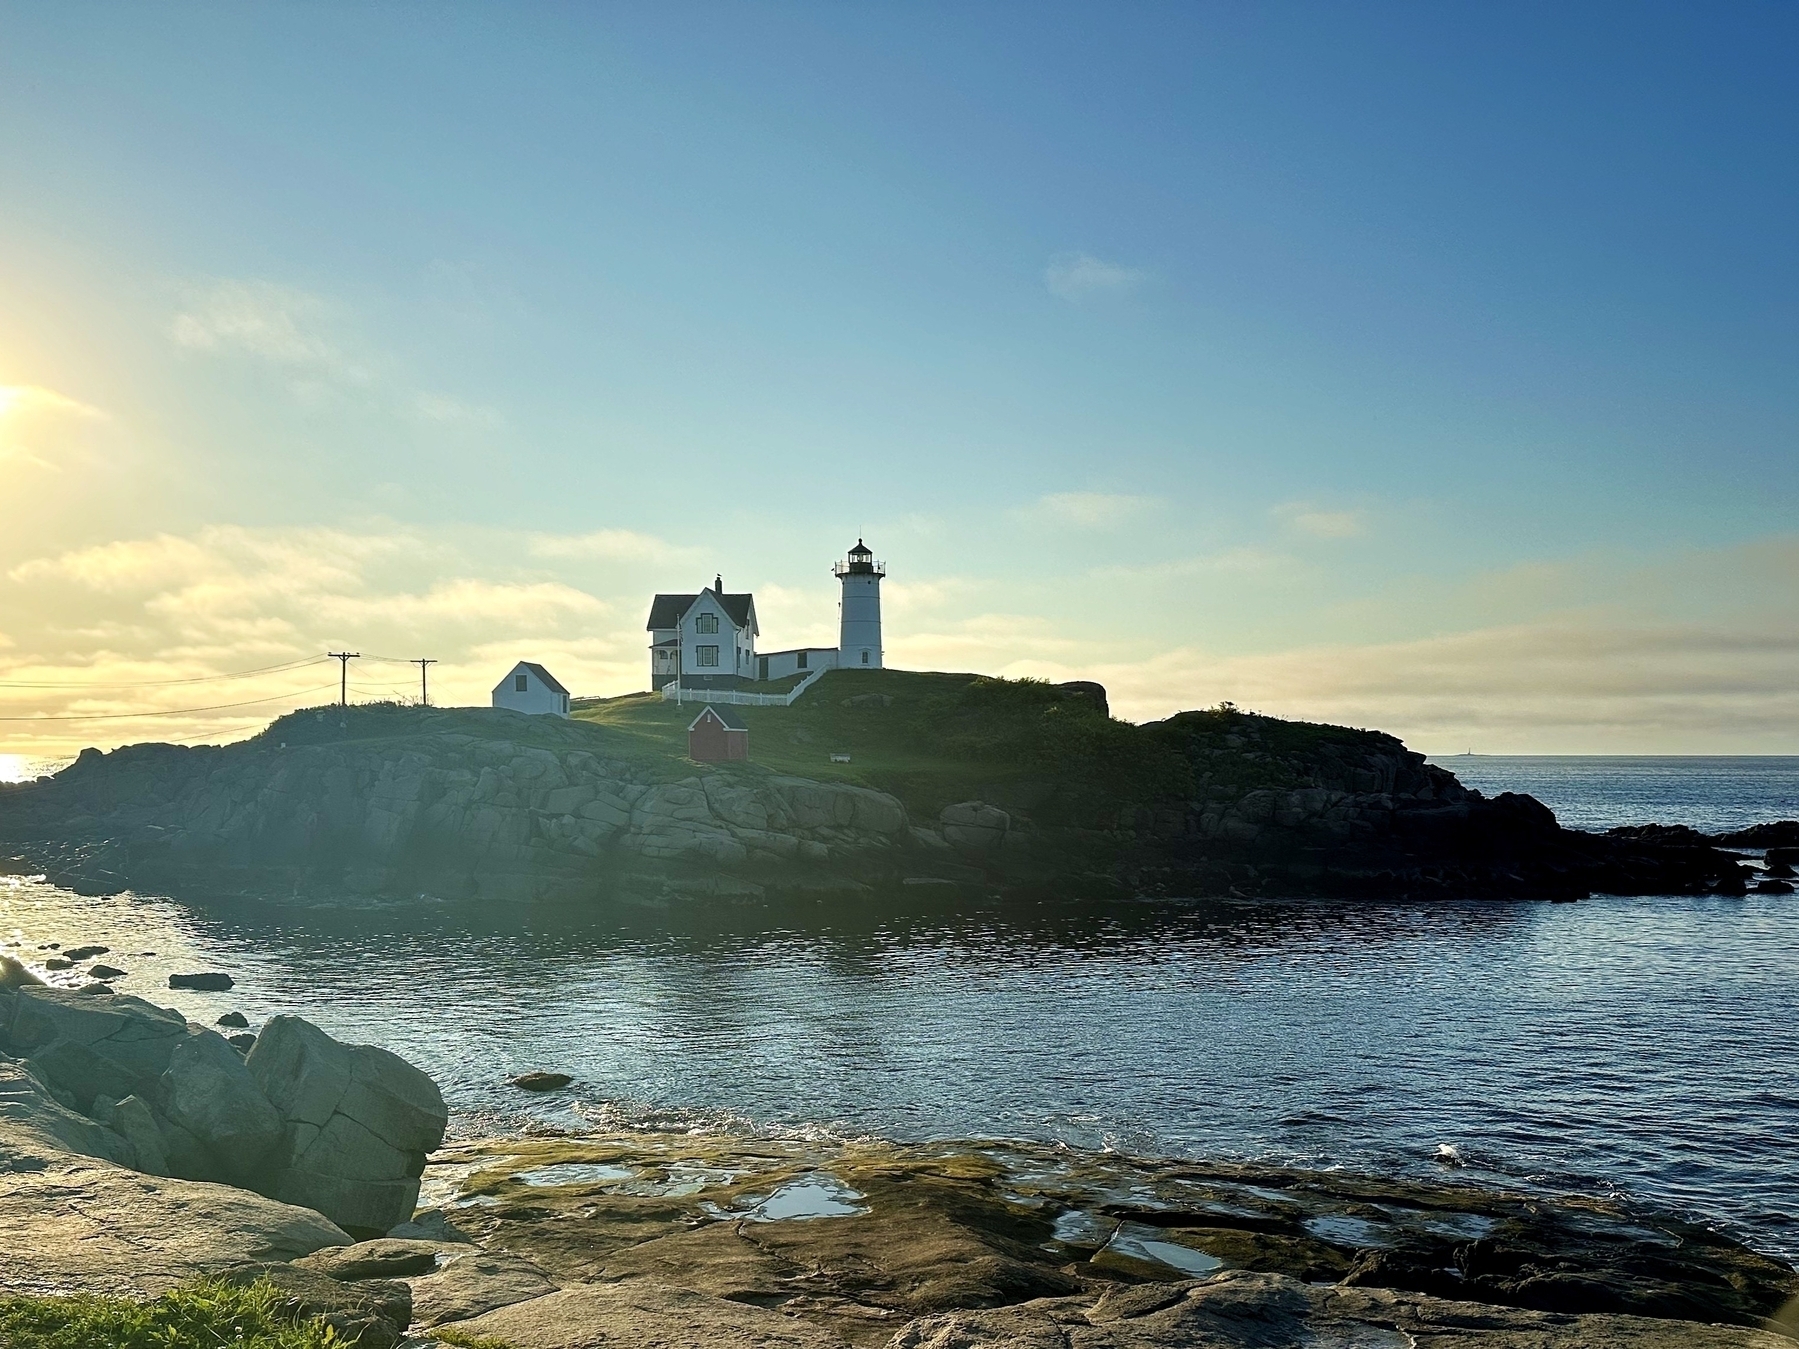 Lighthouse standing on a rocky coastal hill under a clear blue sky with the ocean and an unobstructed horizon in the background during daylight.